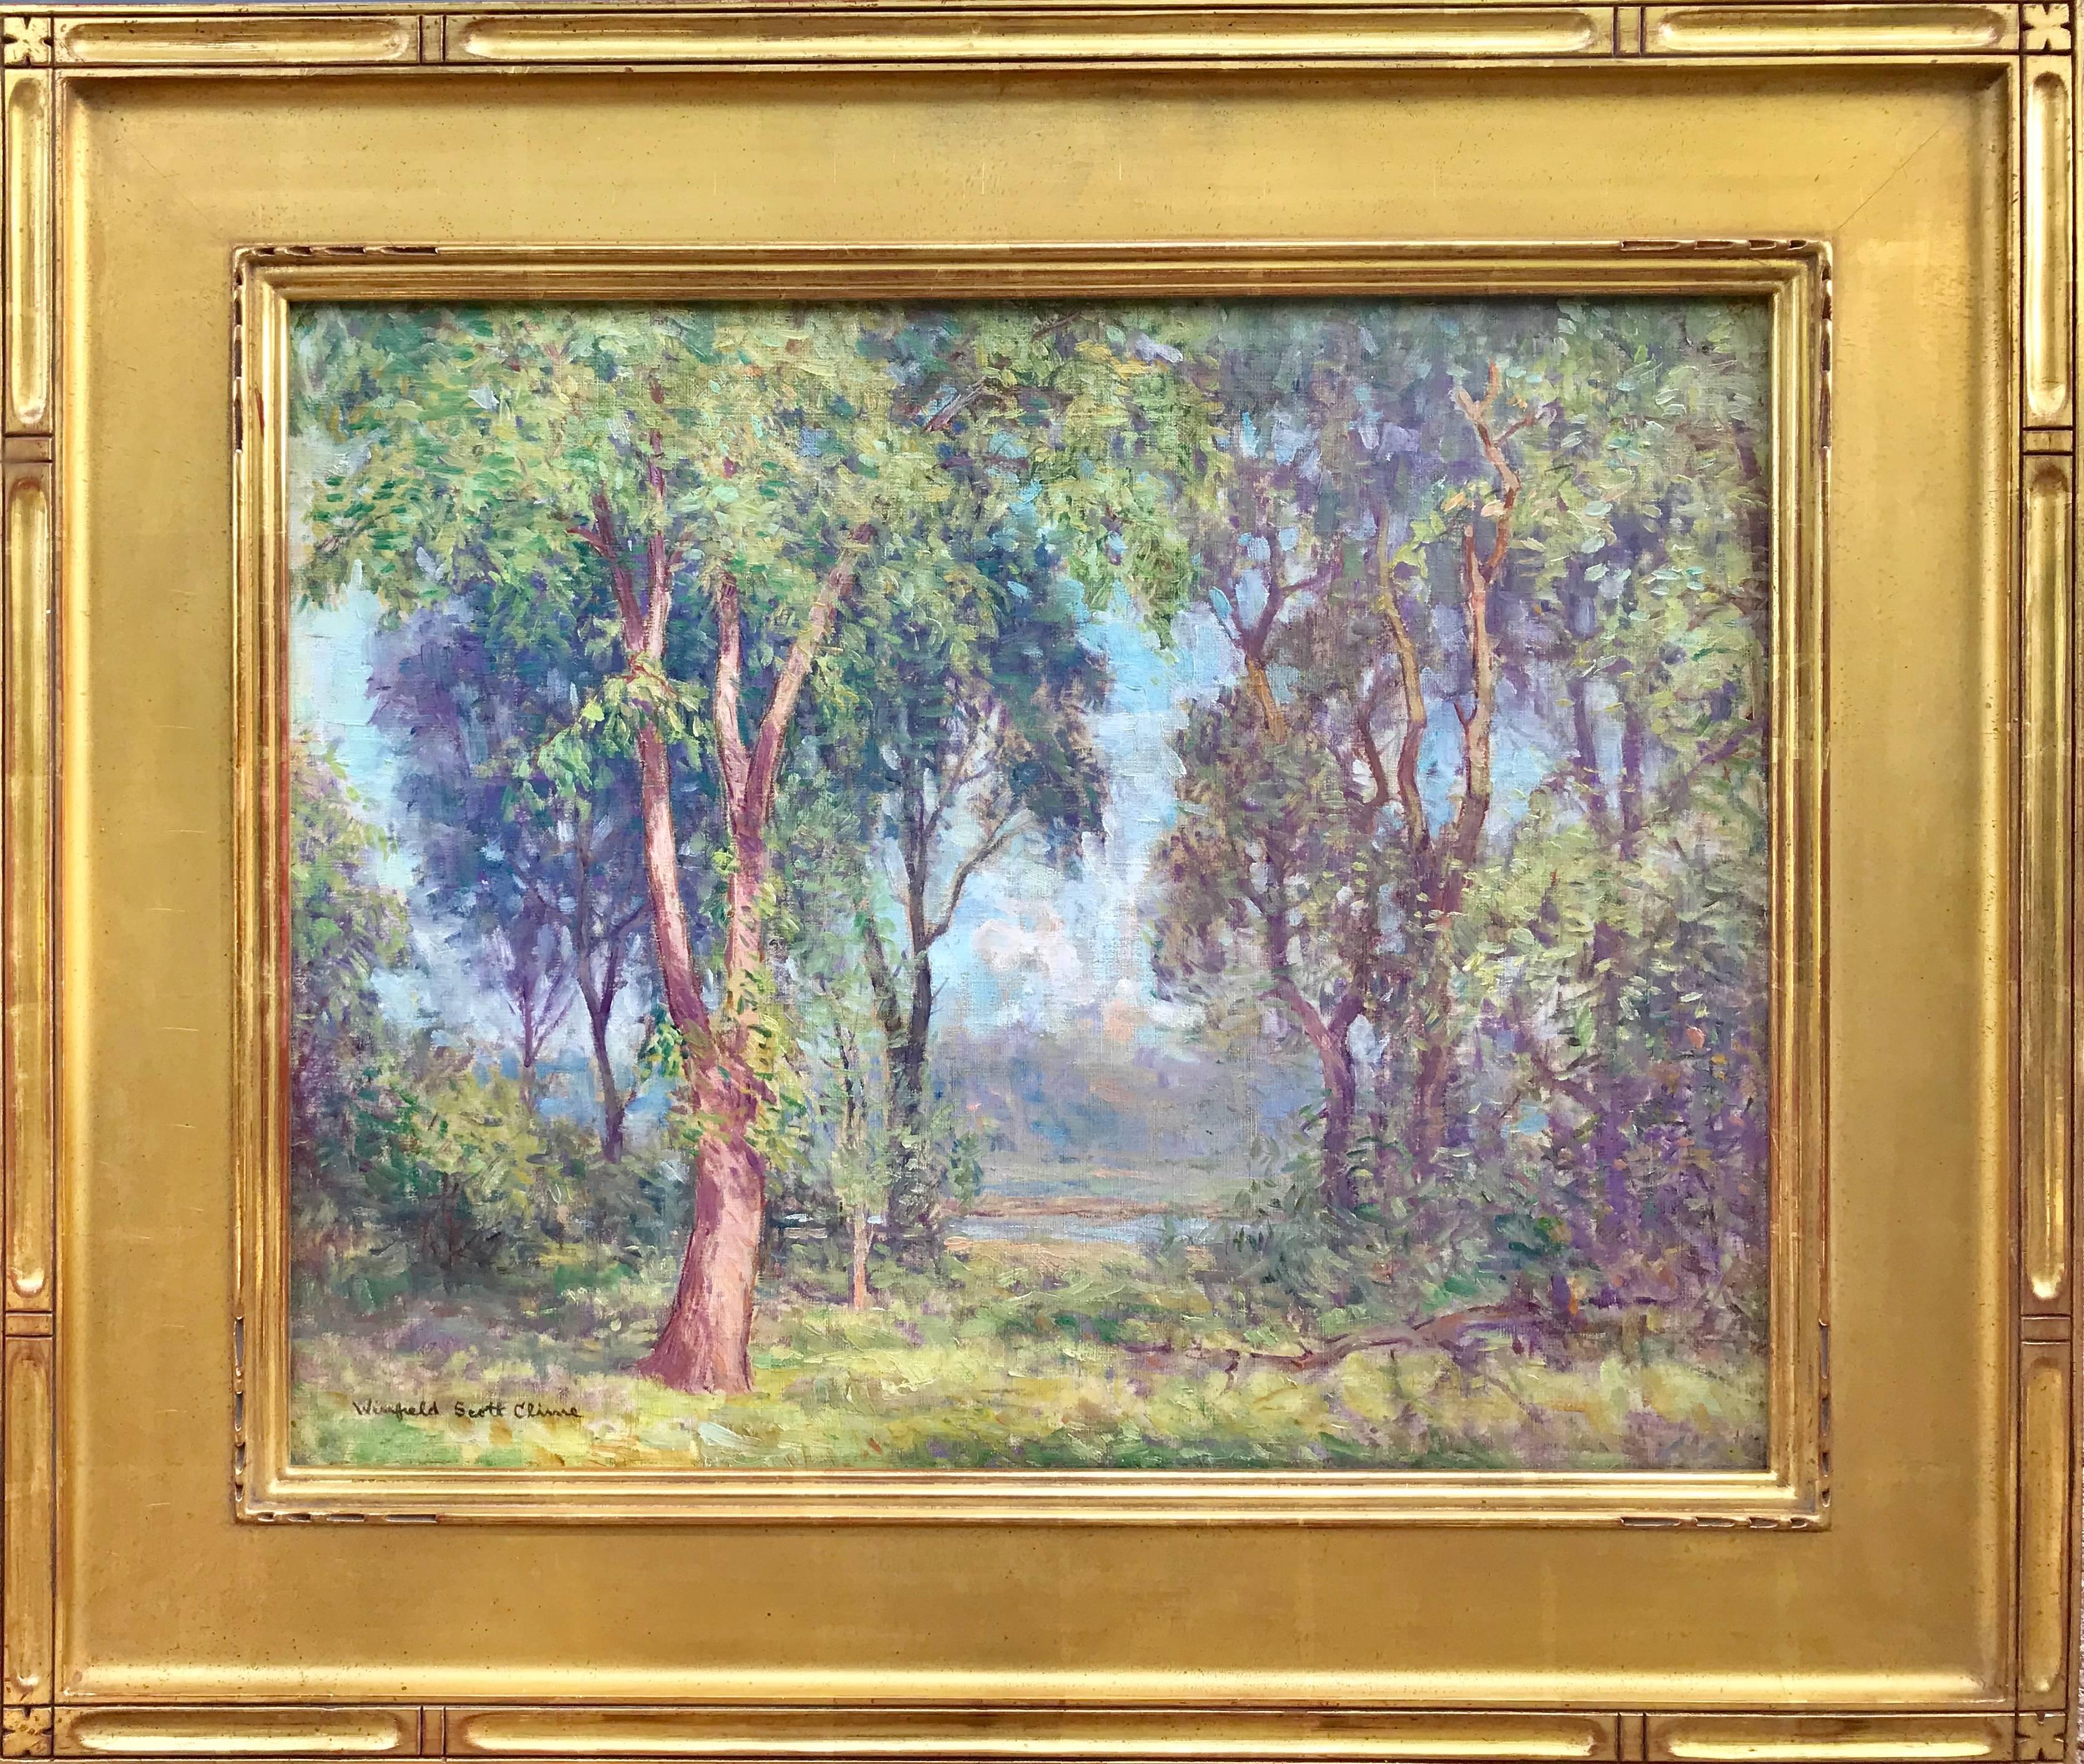 “Woodland Vista” - Painting by Winfield Scott Clime